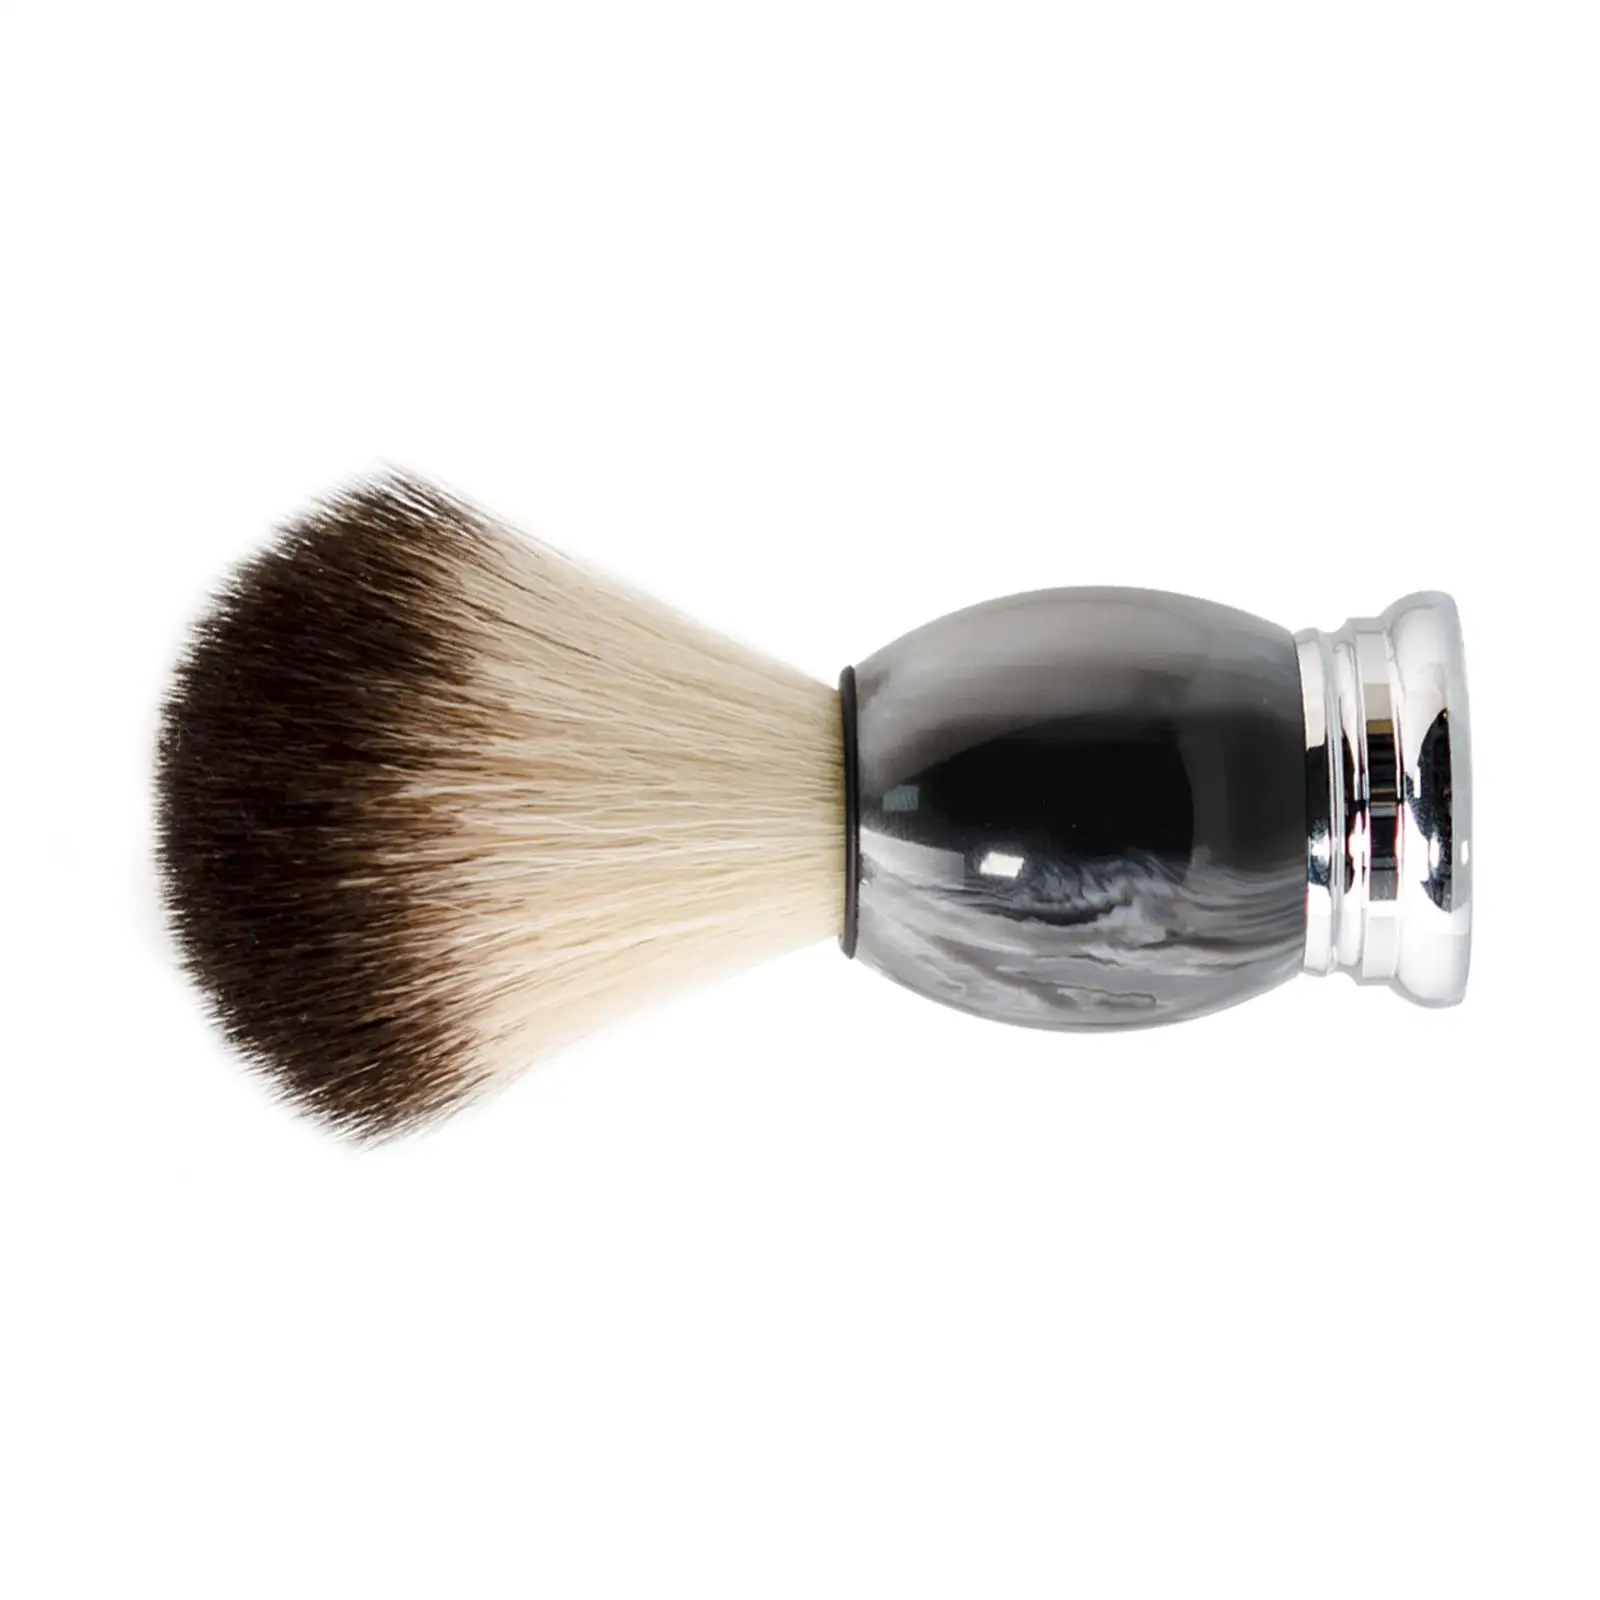 Shaving Brush Him Dad Boyfriend Husband Face Cleaning Male Care Grooming Product Handmade Shaving Brush Men`s Shaving Brush